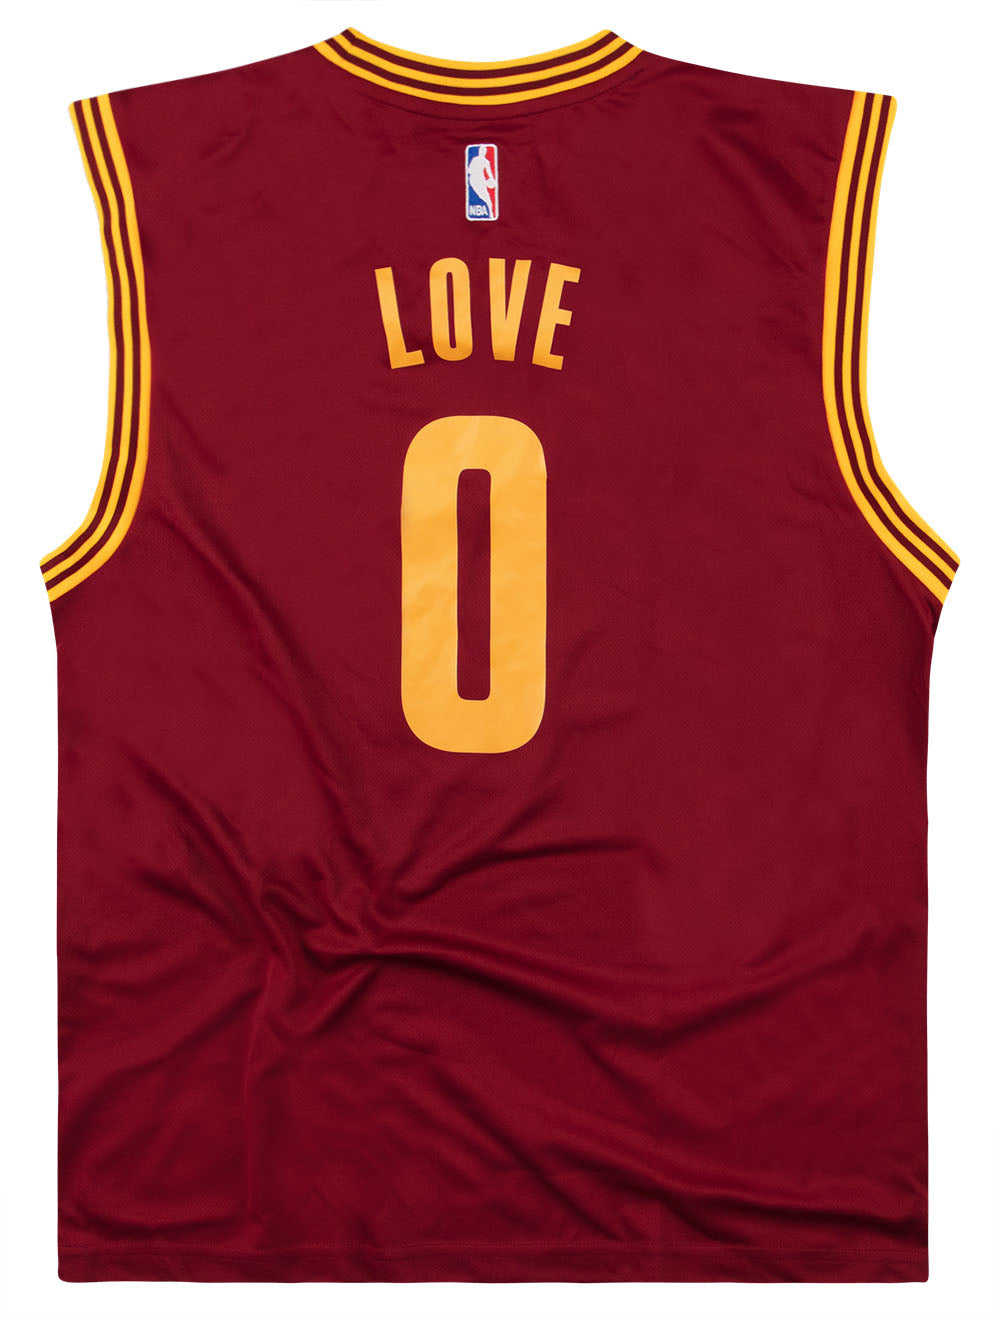 2014-17 CLEVELAND CAVALIERS LOVE #0 ADIDAS JERSEY (AWAY) XL - W/TAGS